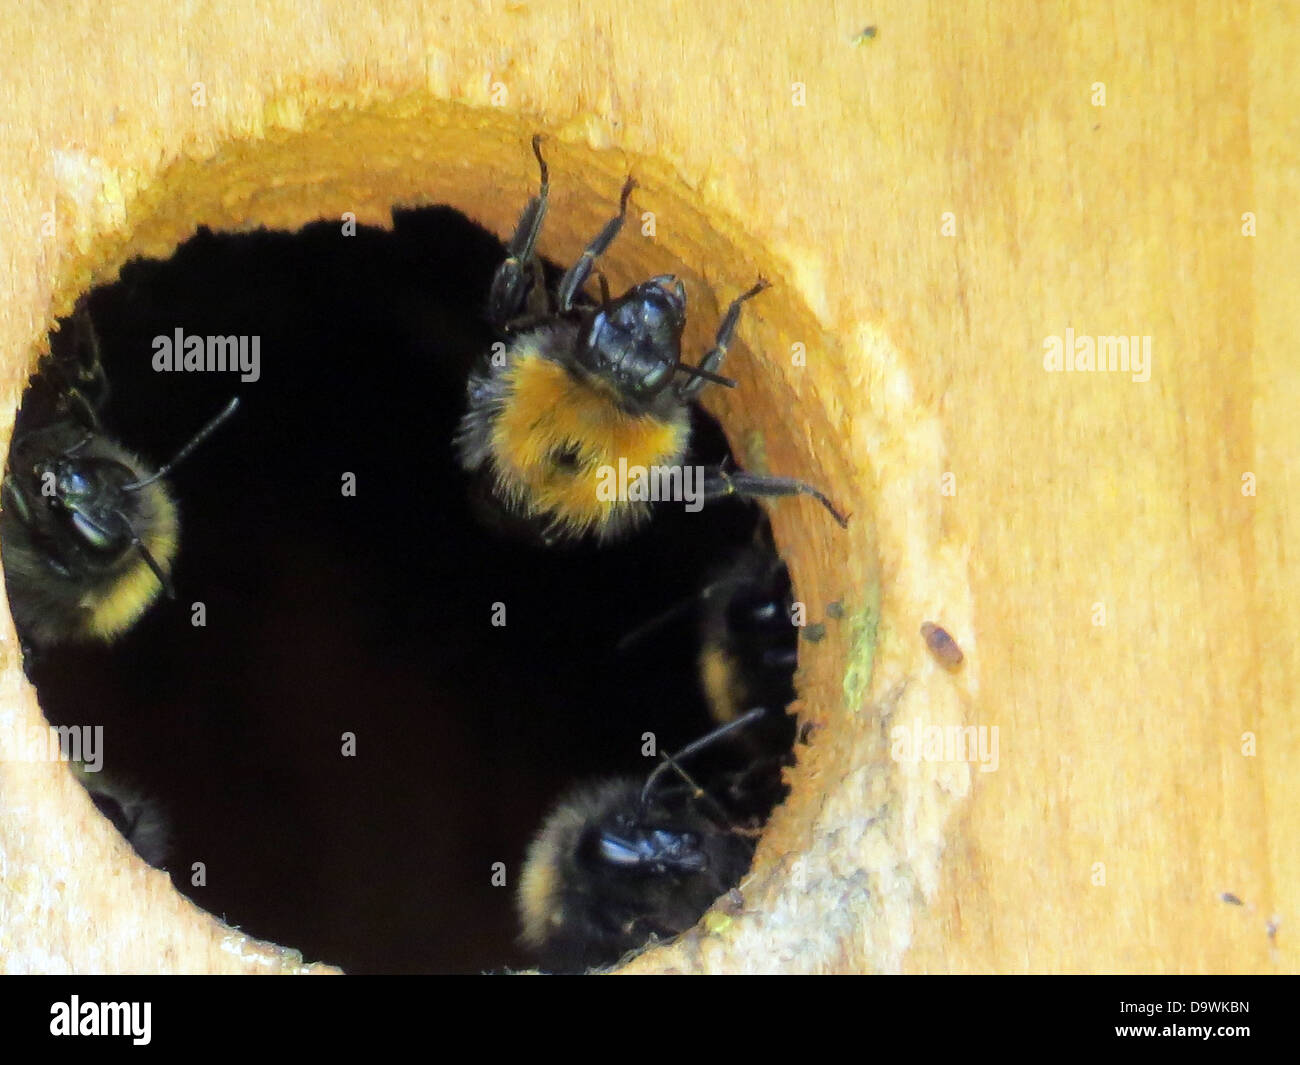 BOMBUS HYPNORUM (The Tree Bee) collecting wood from entrance to a bird nest box in June. Photo Tony Gale Stock Photo